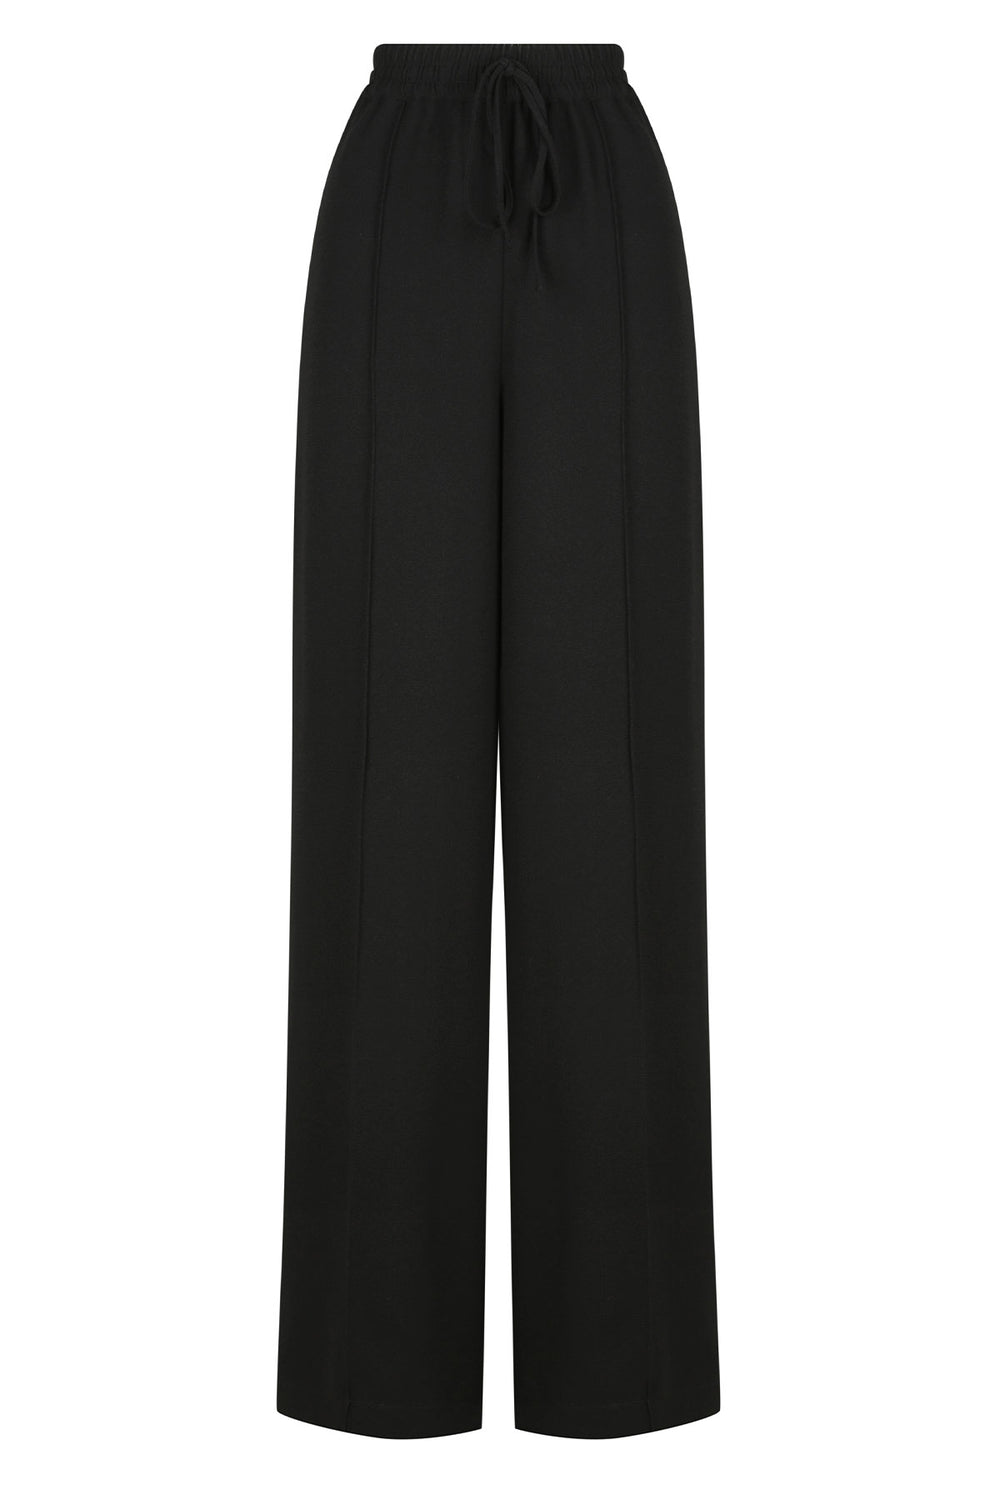 AMURA RELAXED PANT